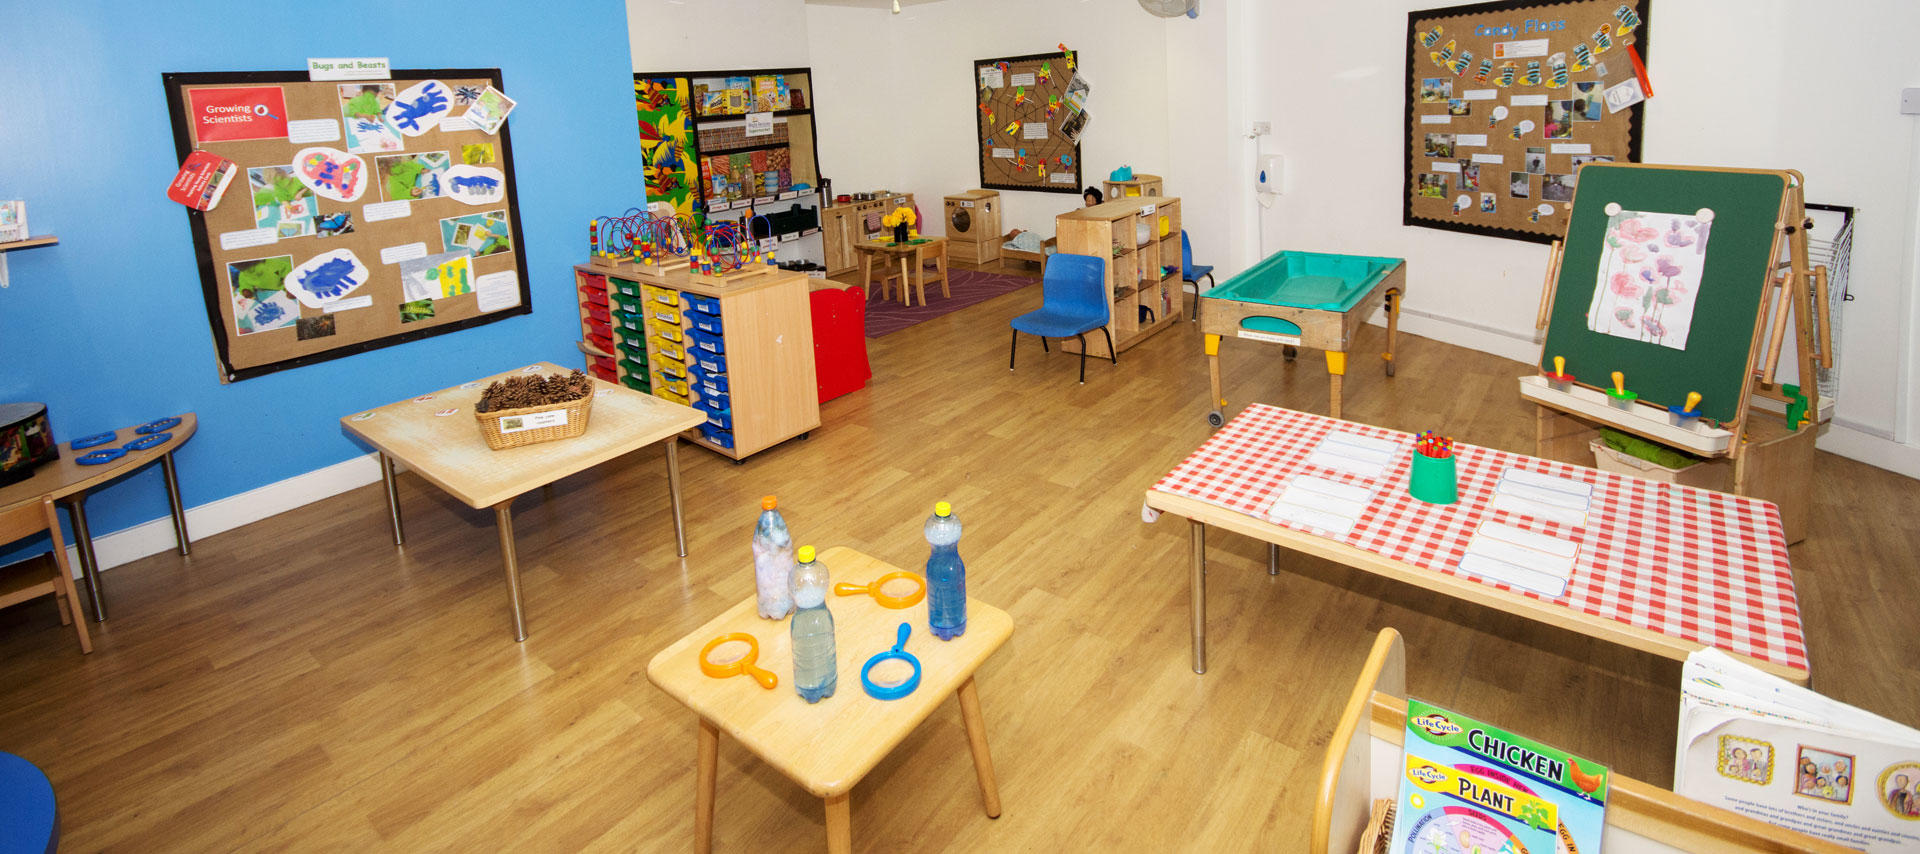 Bright Horizons Manchester Day Nursery and Preschool Manchester 03333 636686